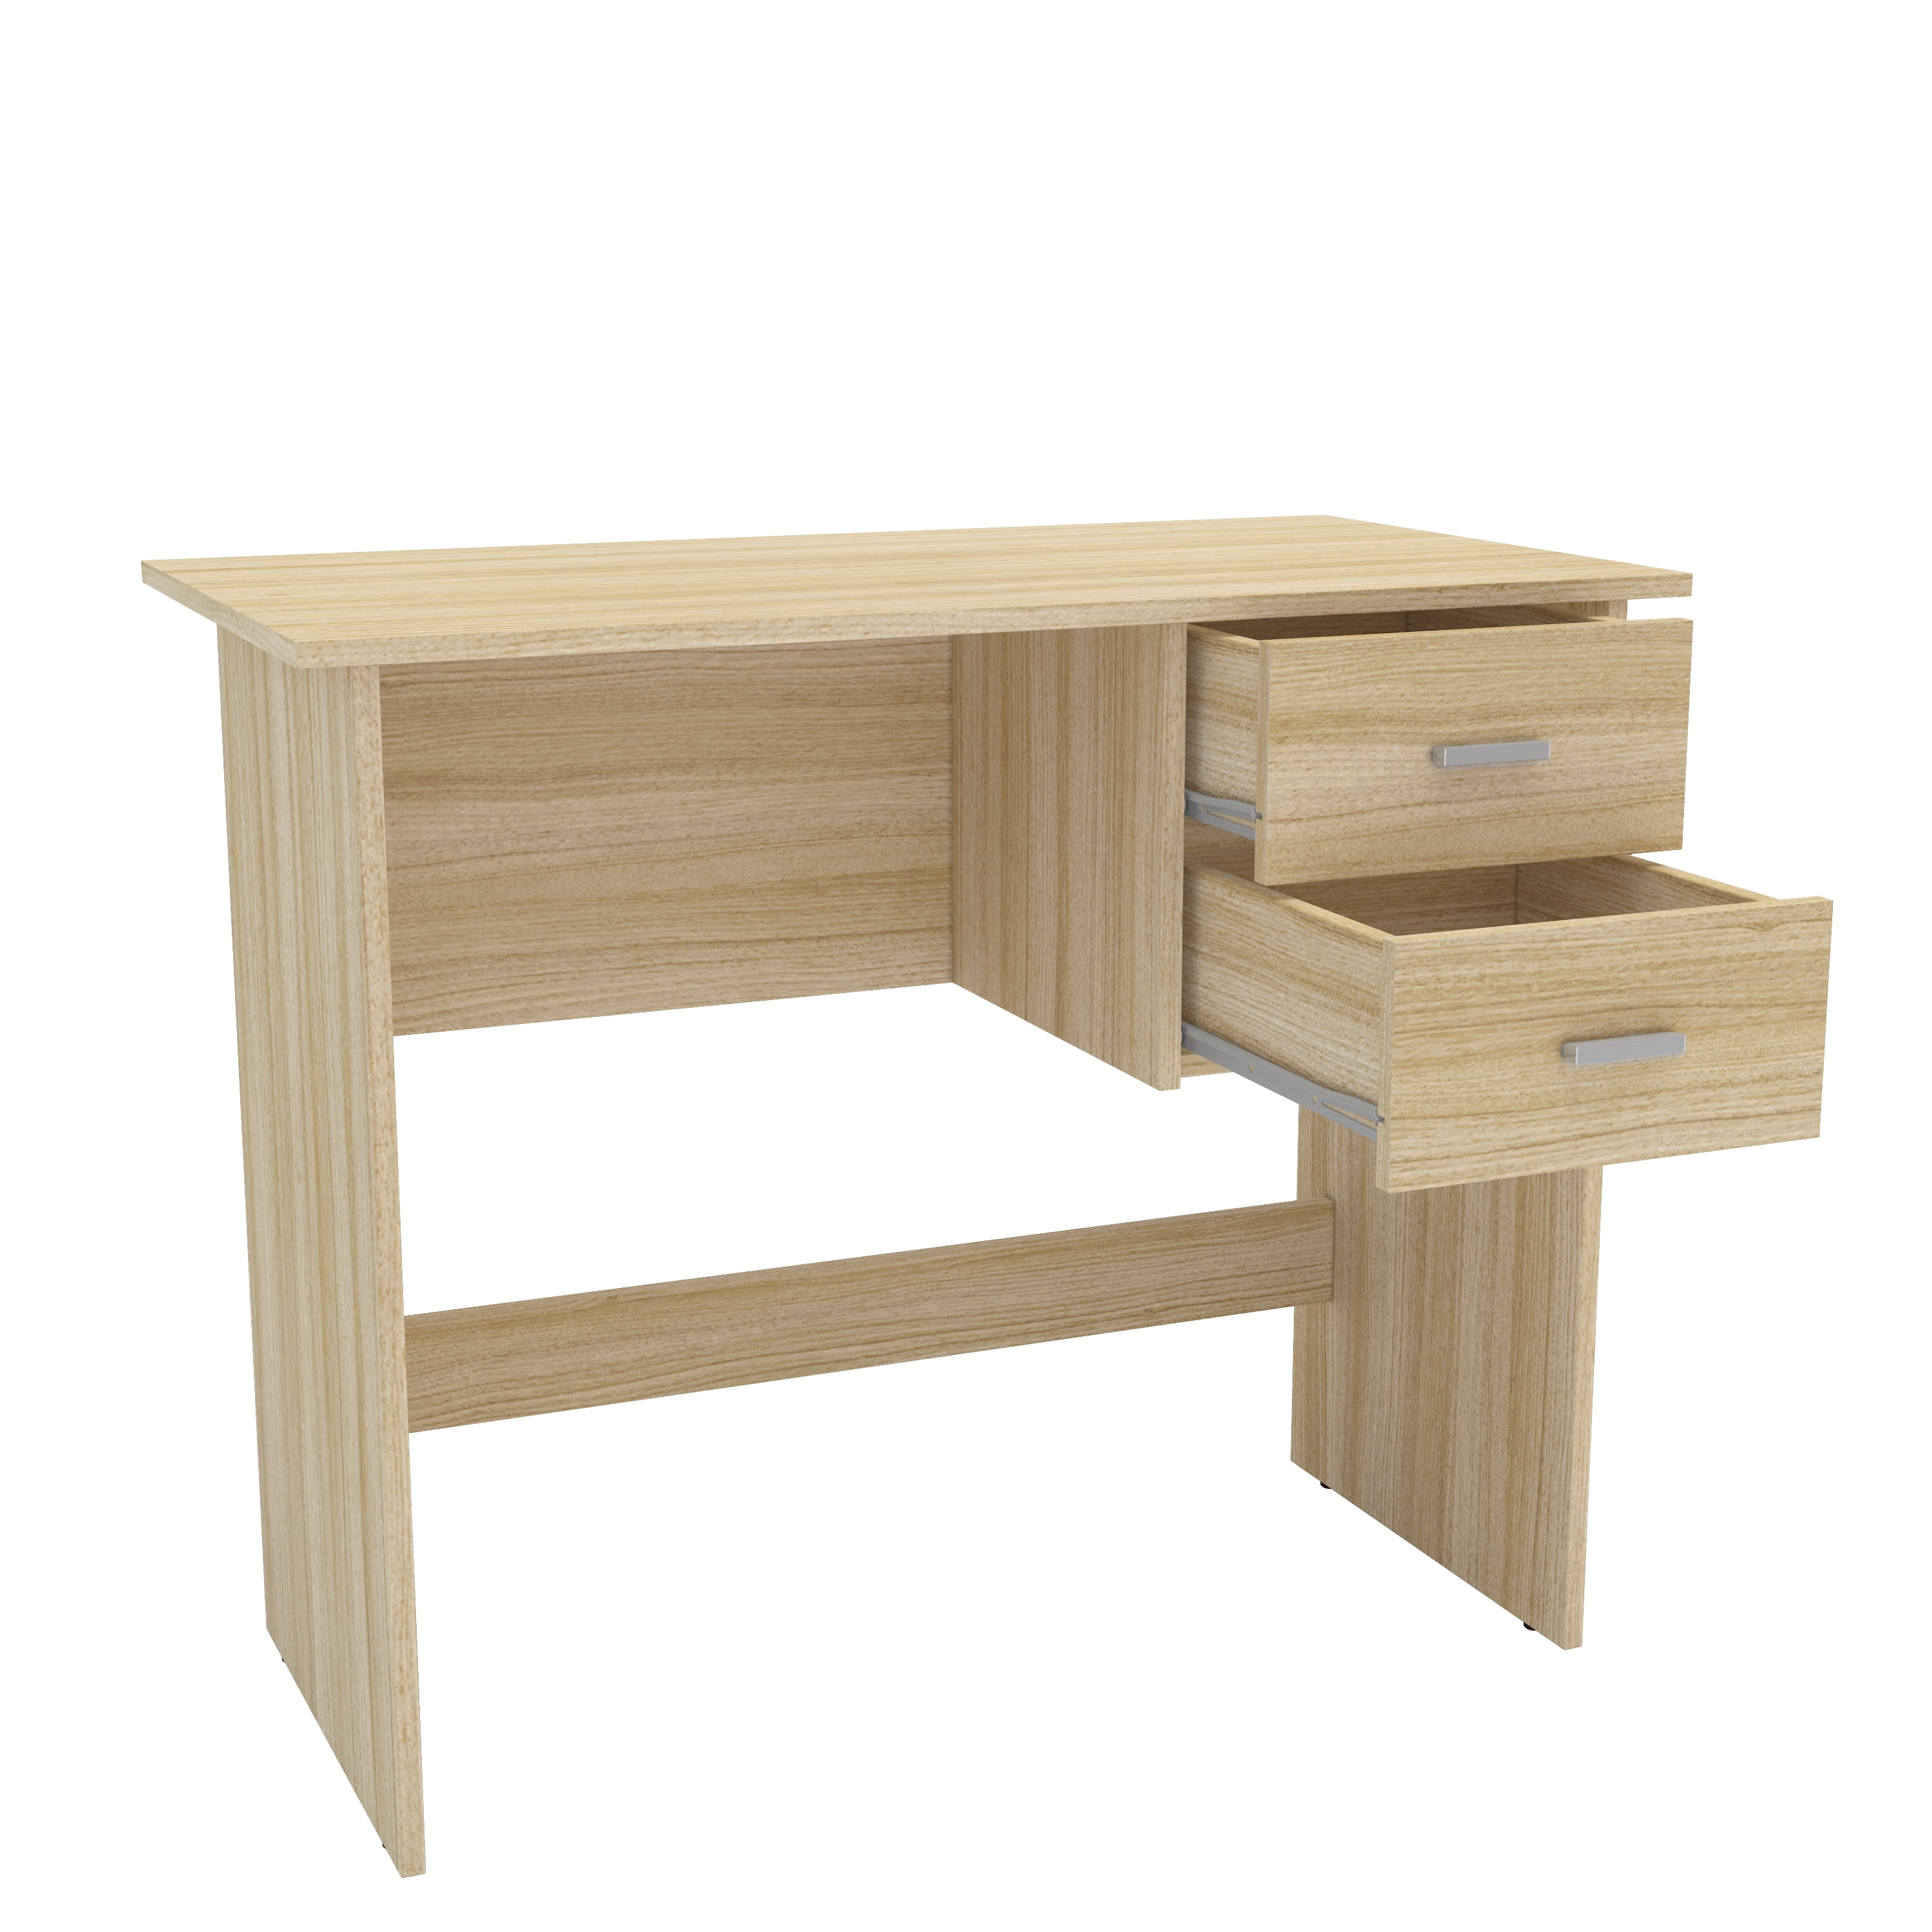 Budapest in. Desk 2 Oak with Polifurniture 35.5 Writing Drawers